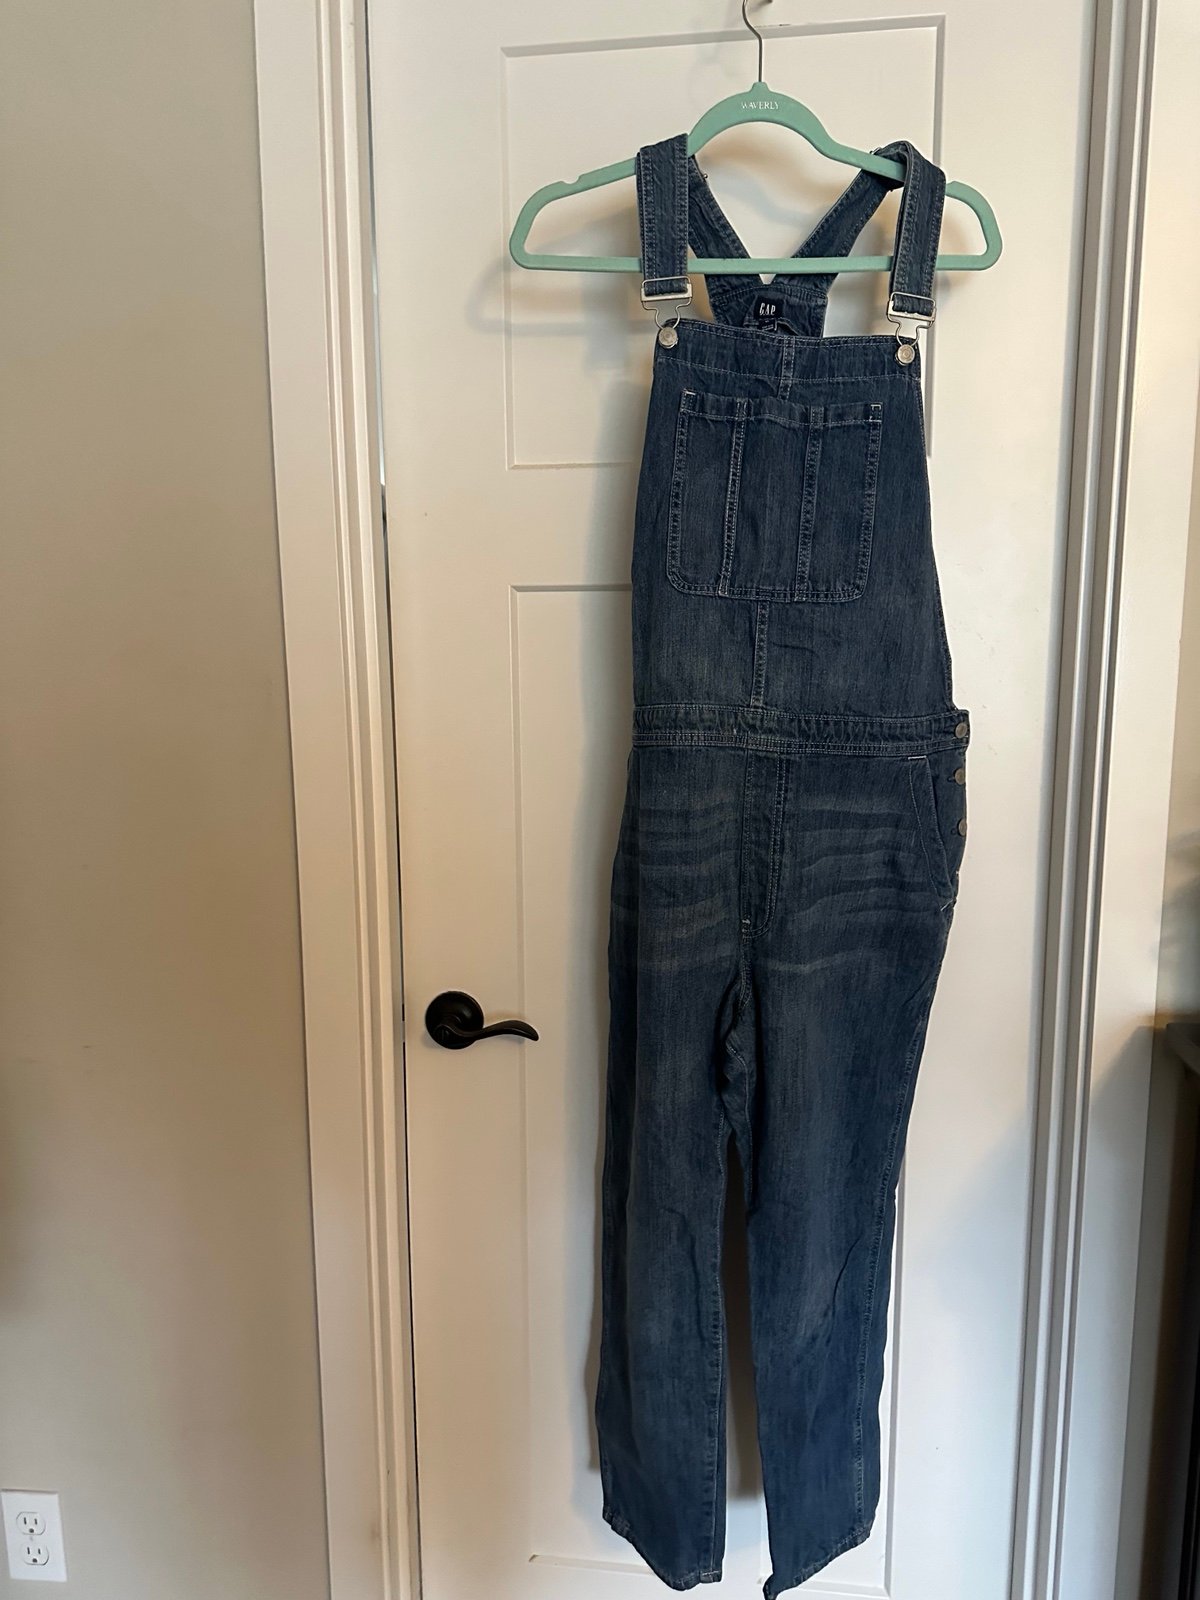 Gorgeous Overalls j4AJW00mH well sale